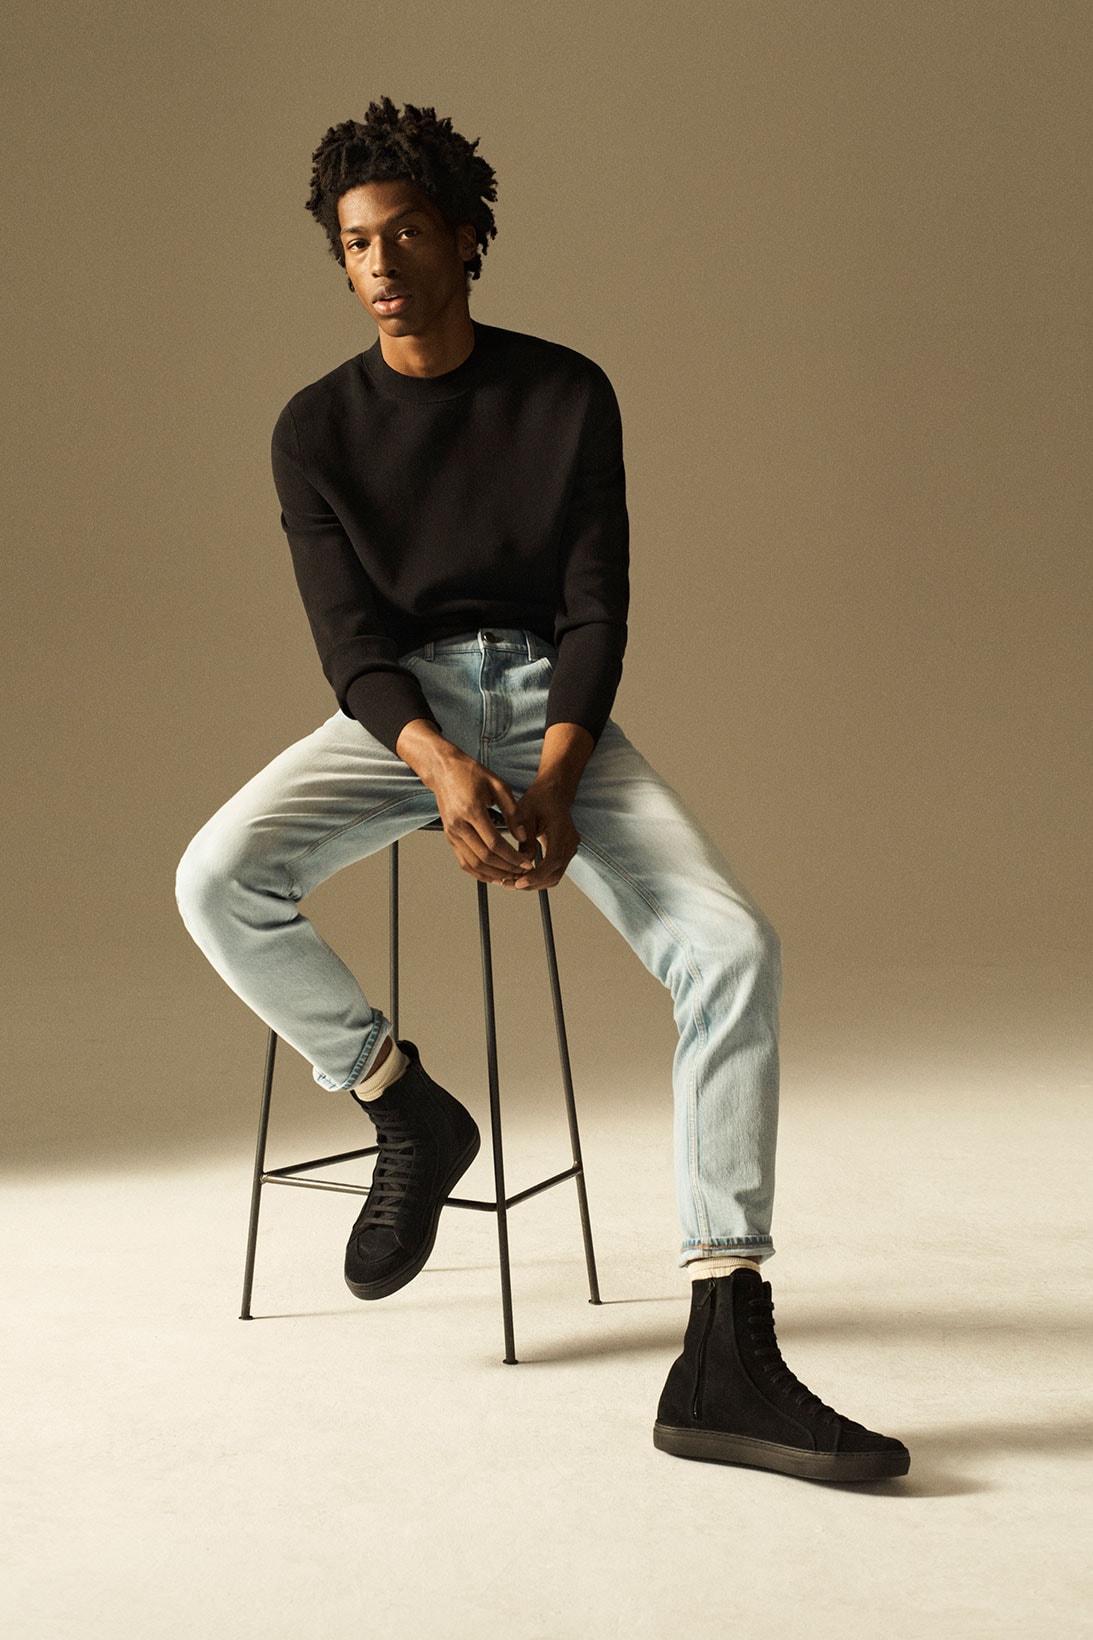 cos spring summer 2021 ss21 sustainable denim collection jeans black shirt styling outfit